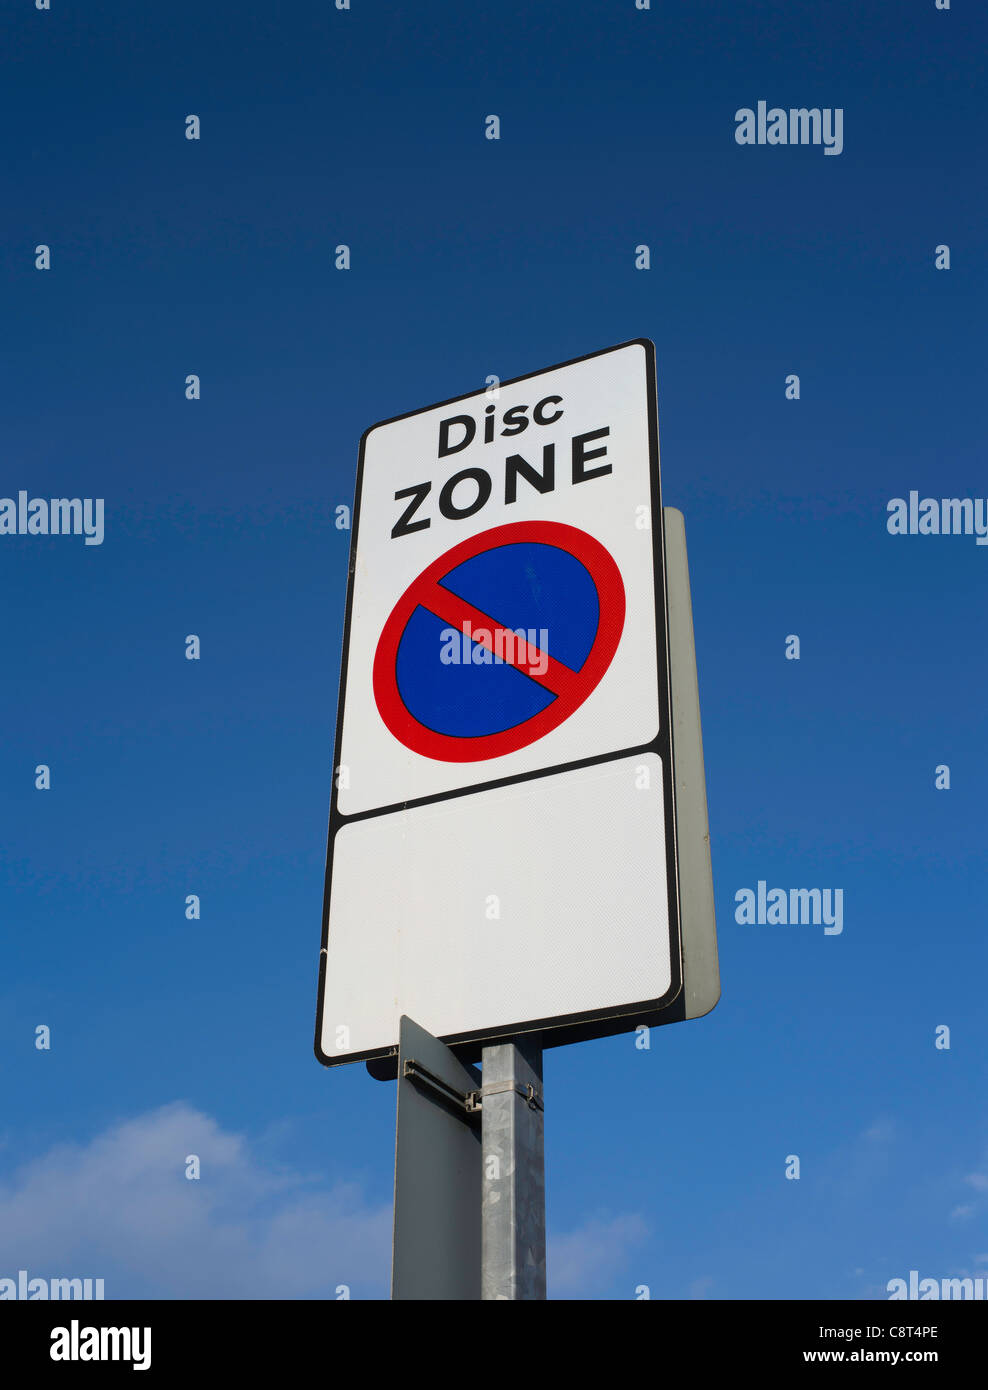 dh Disc zone SIGNPOST UK Traffic Sign Parking DISC zone area segnaletica stradale Foto Stock